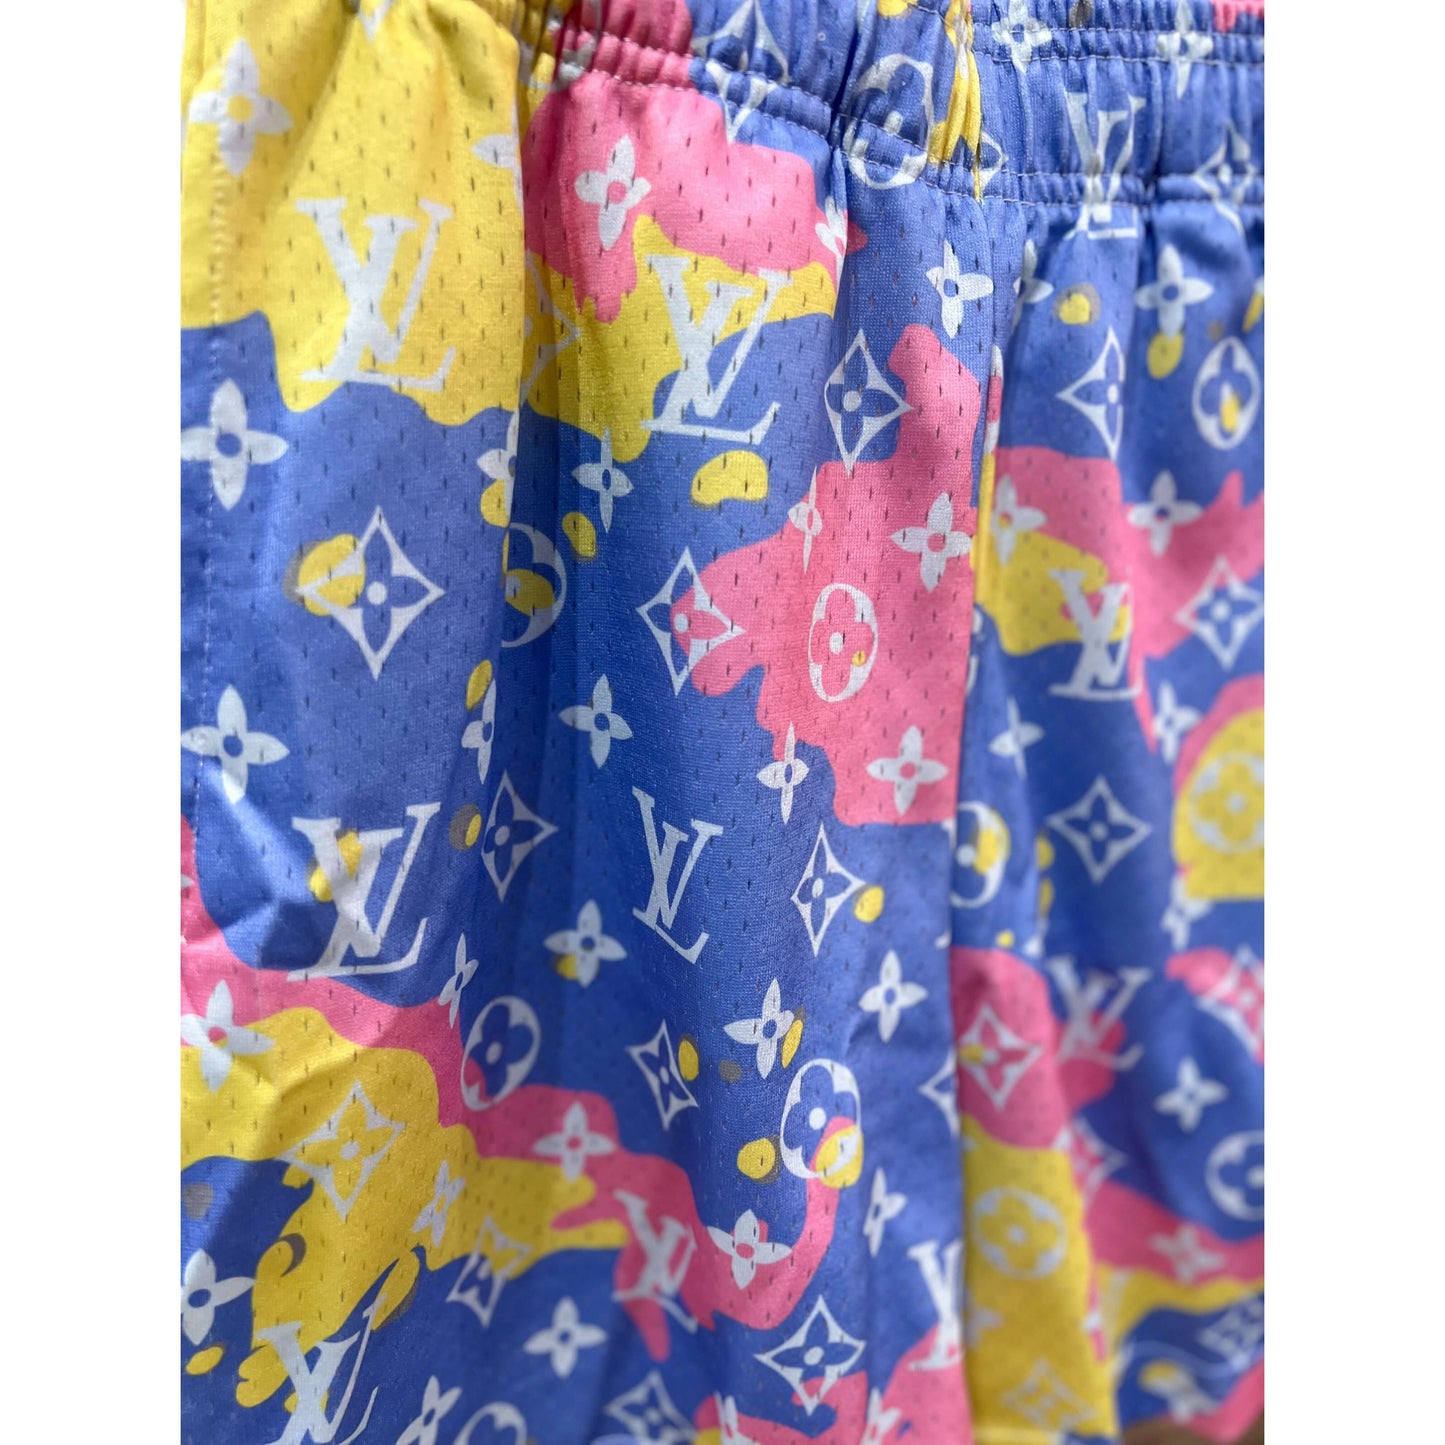 Bravest Studios Camo Shorts - Cotton Candy Blue by Bravest Studios from £100.00